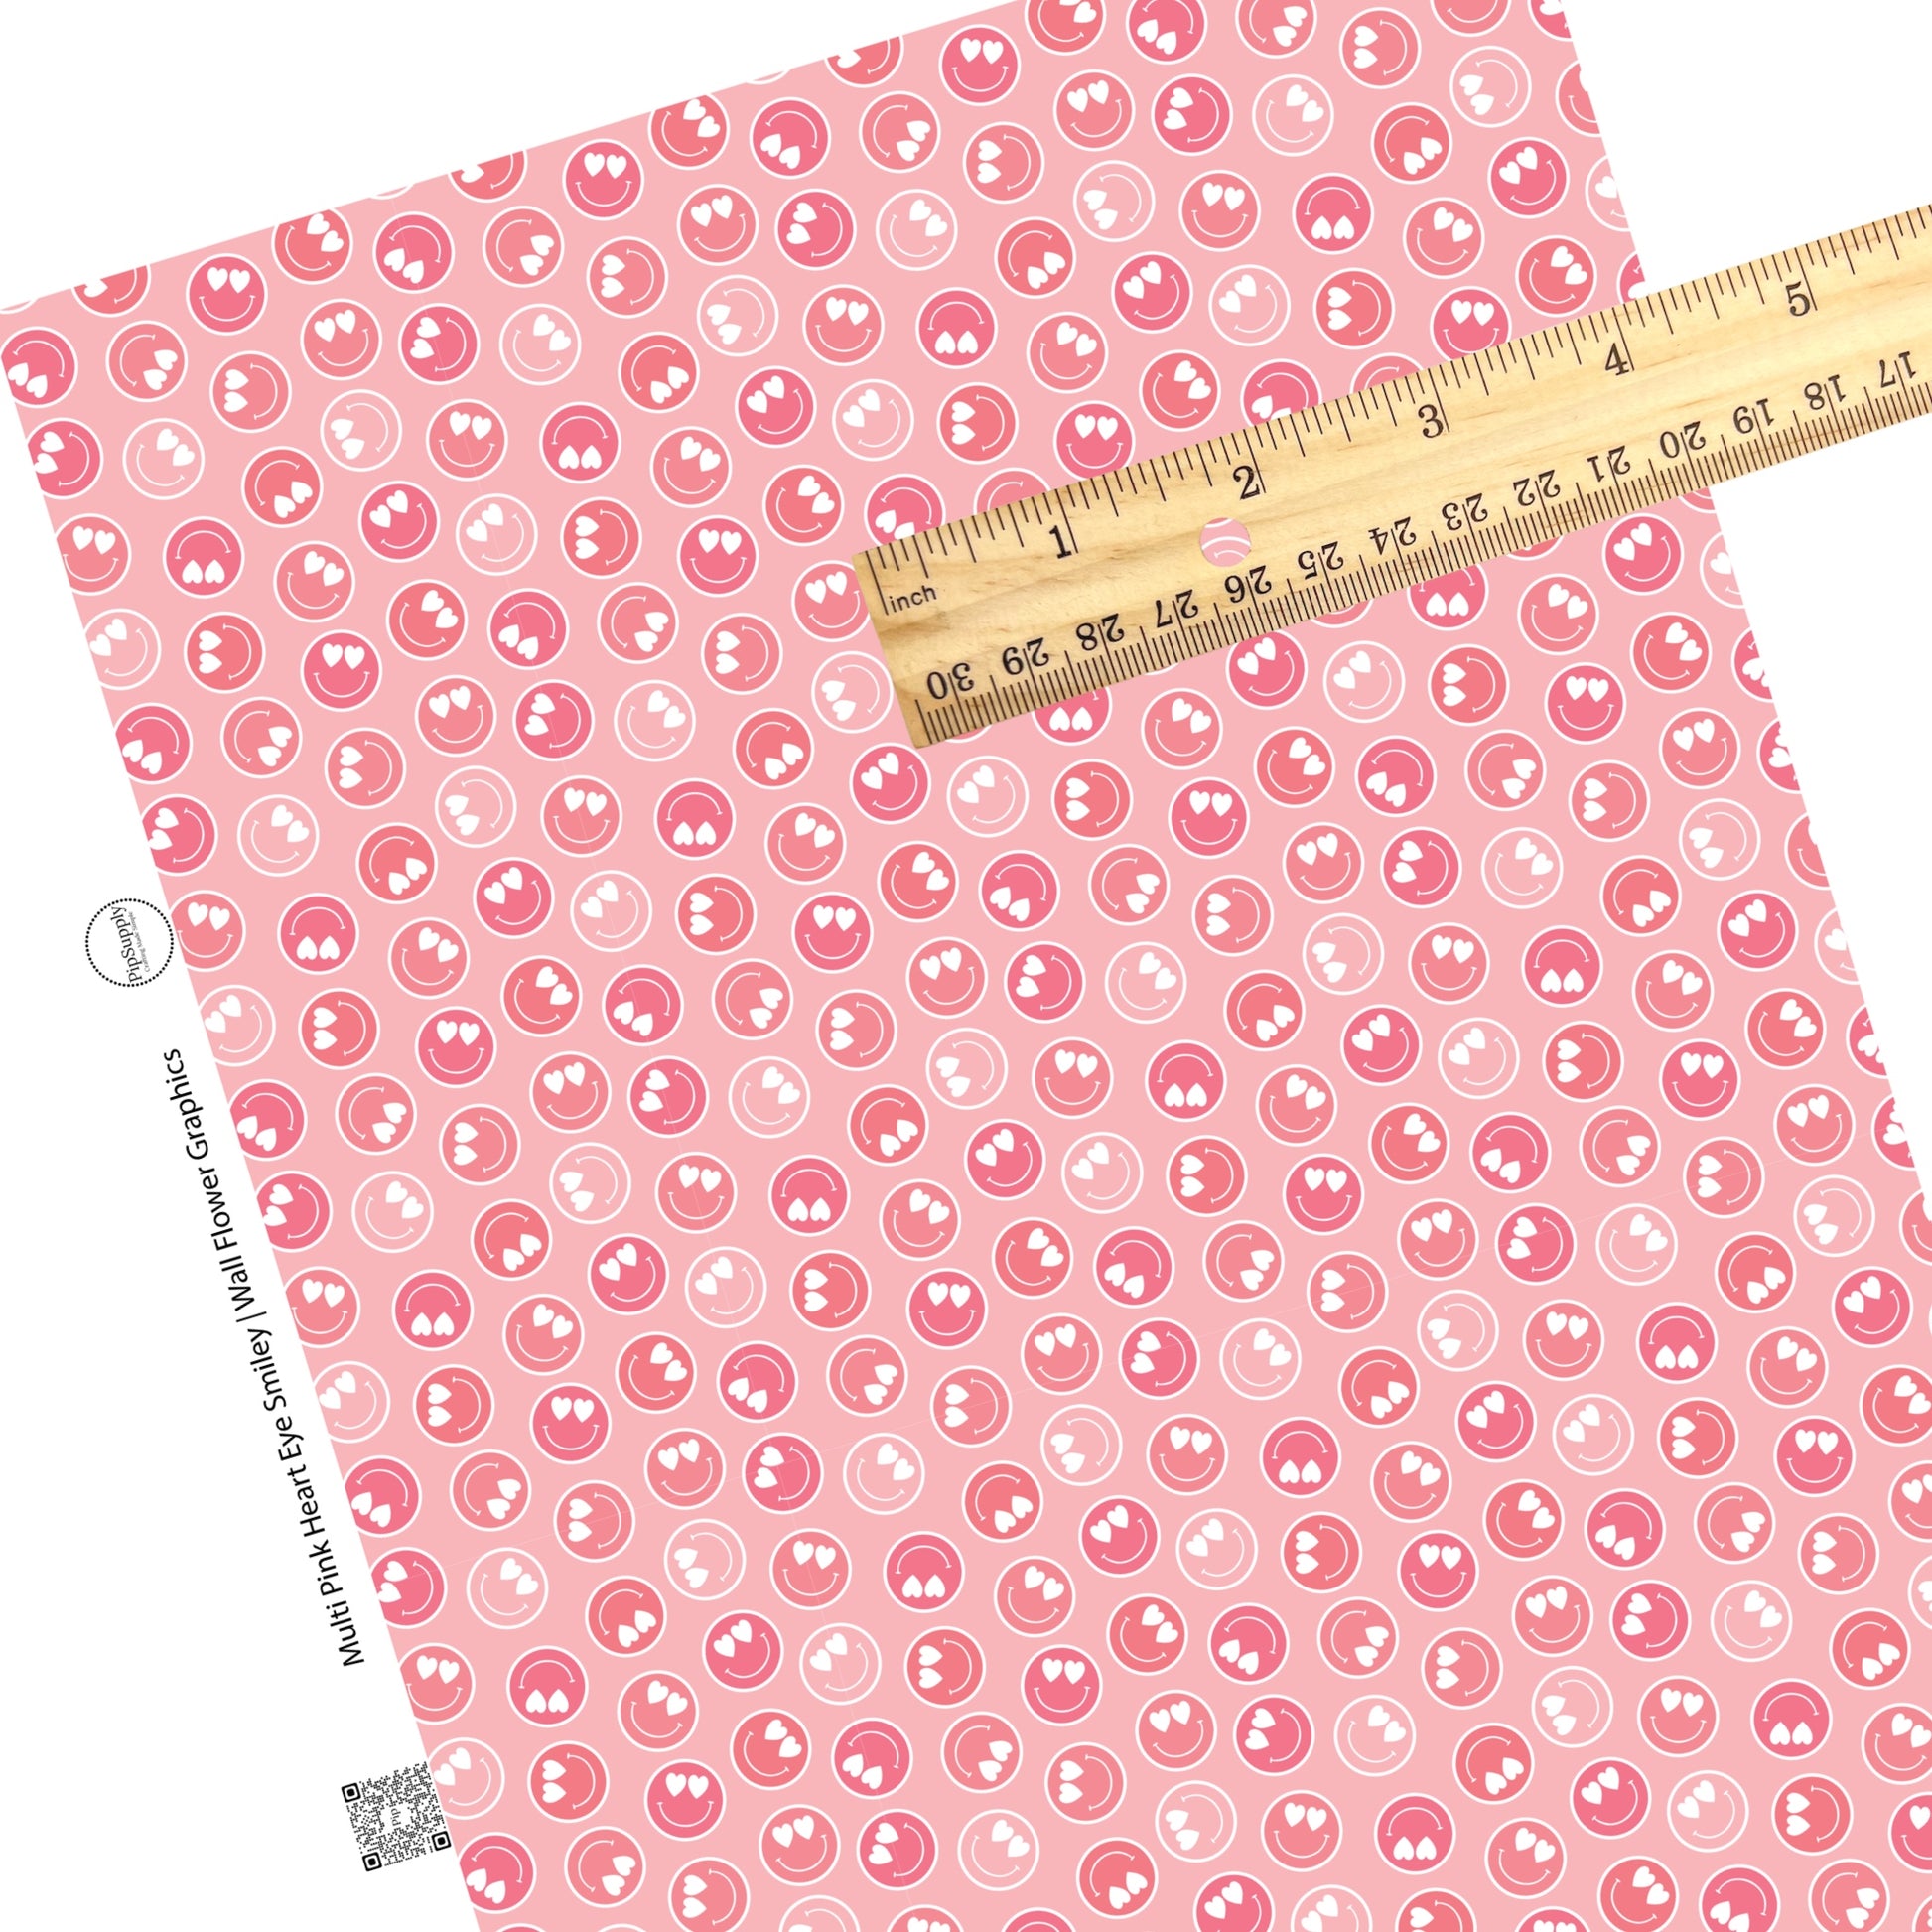 Smiley faces with heart eyes on pink faux leather sheets